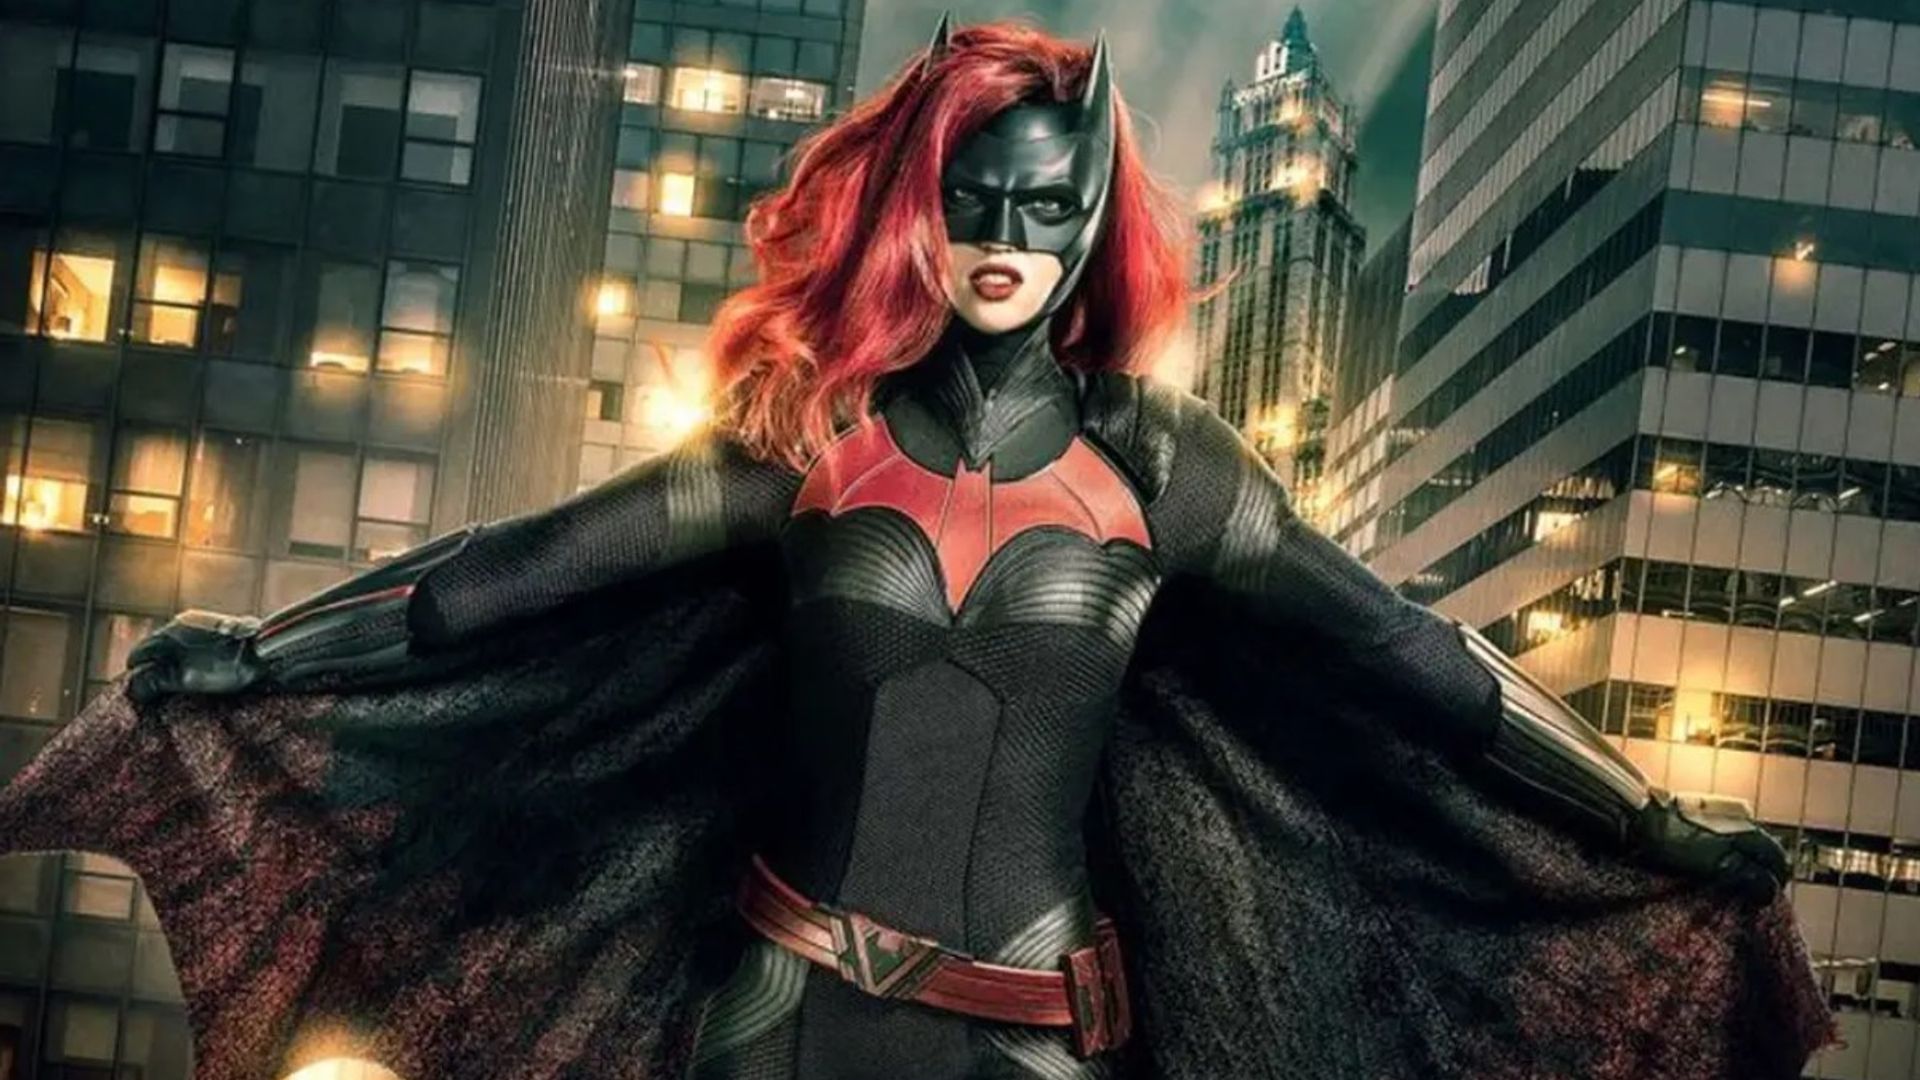 Ruby Rose praises new Batwoman casting after quitting show